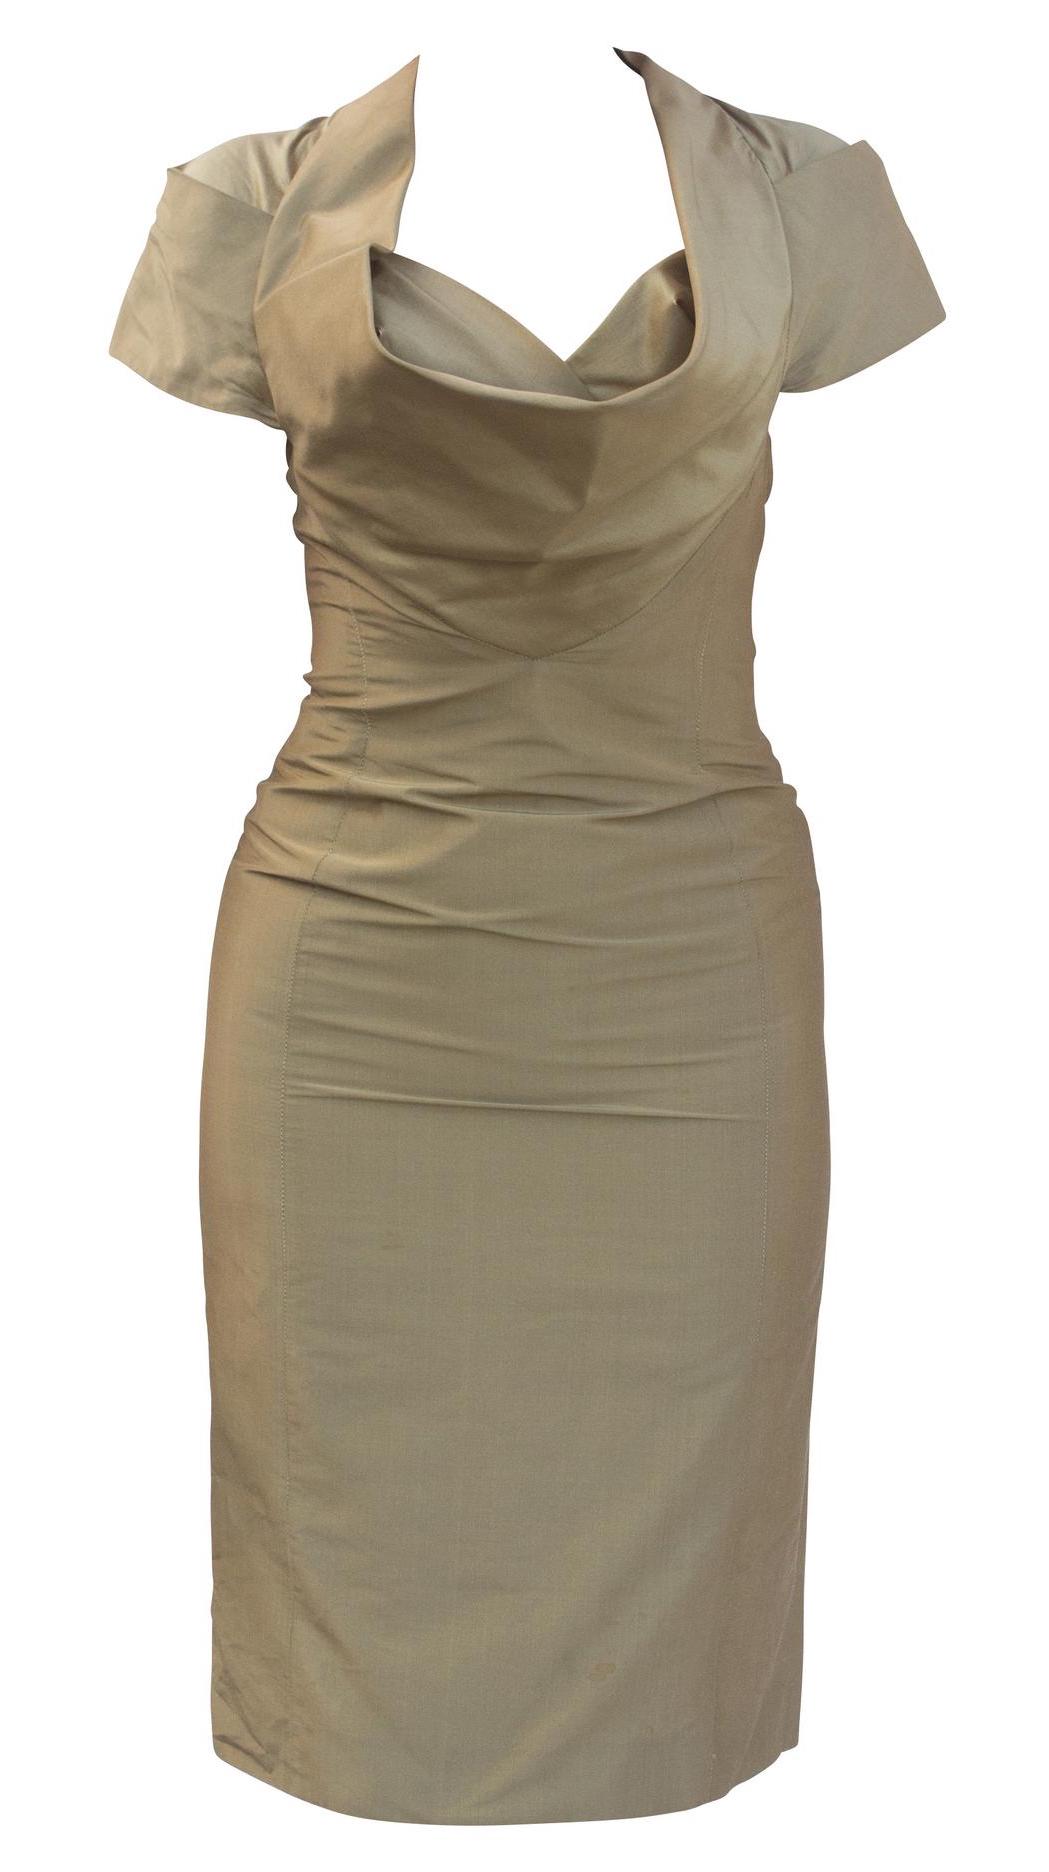 Vivienne Westwood GOLD DRESS Description: Lining dress made in silk and...